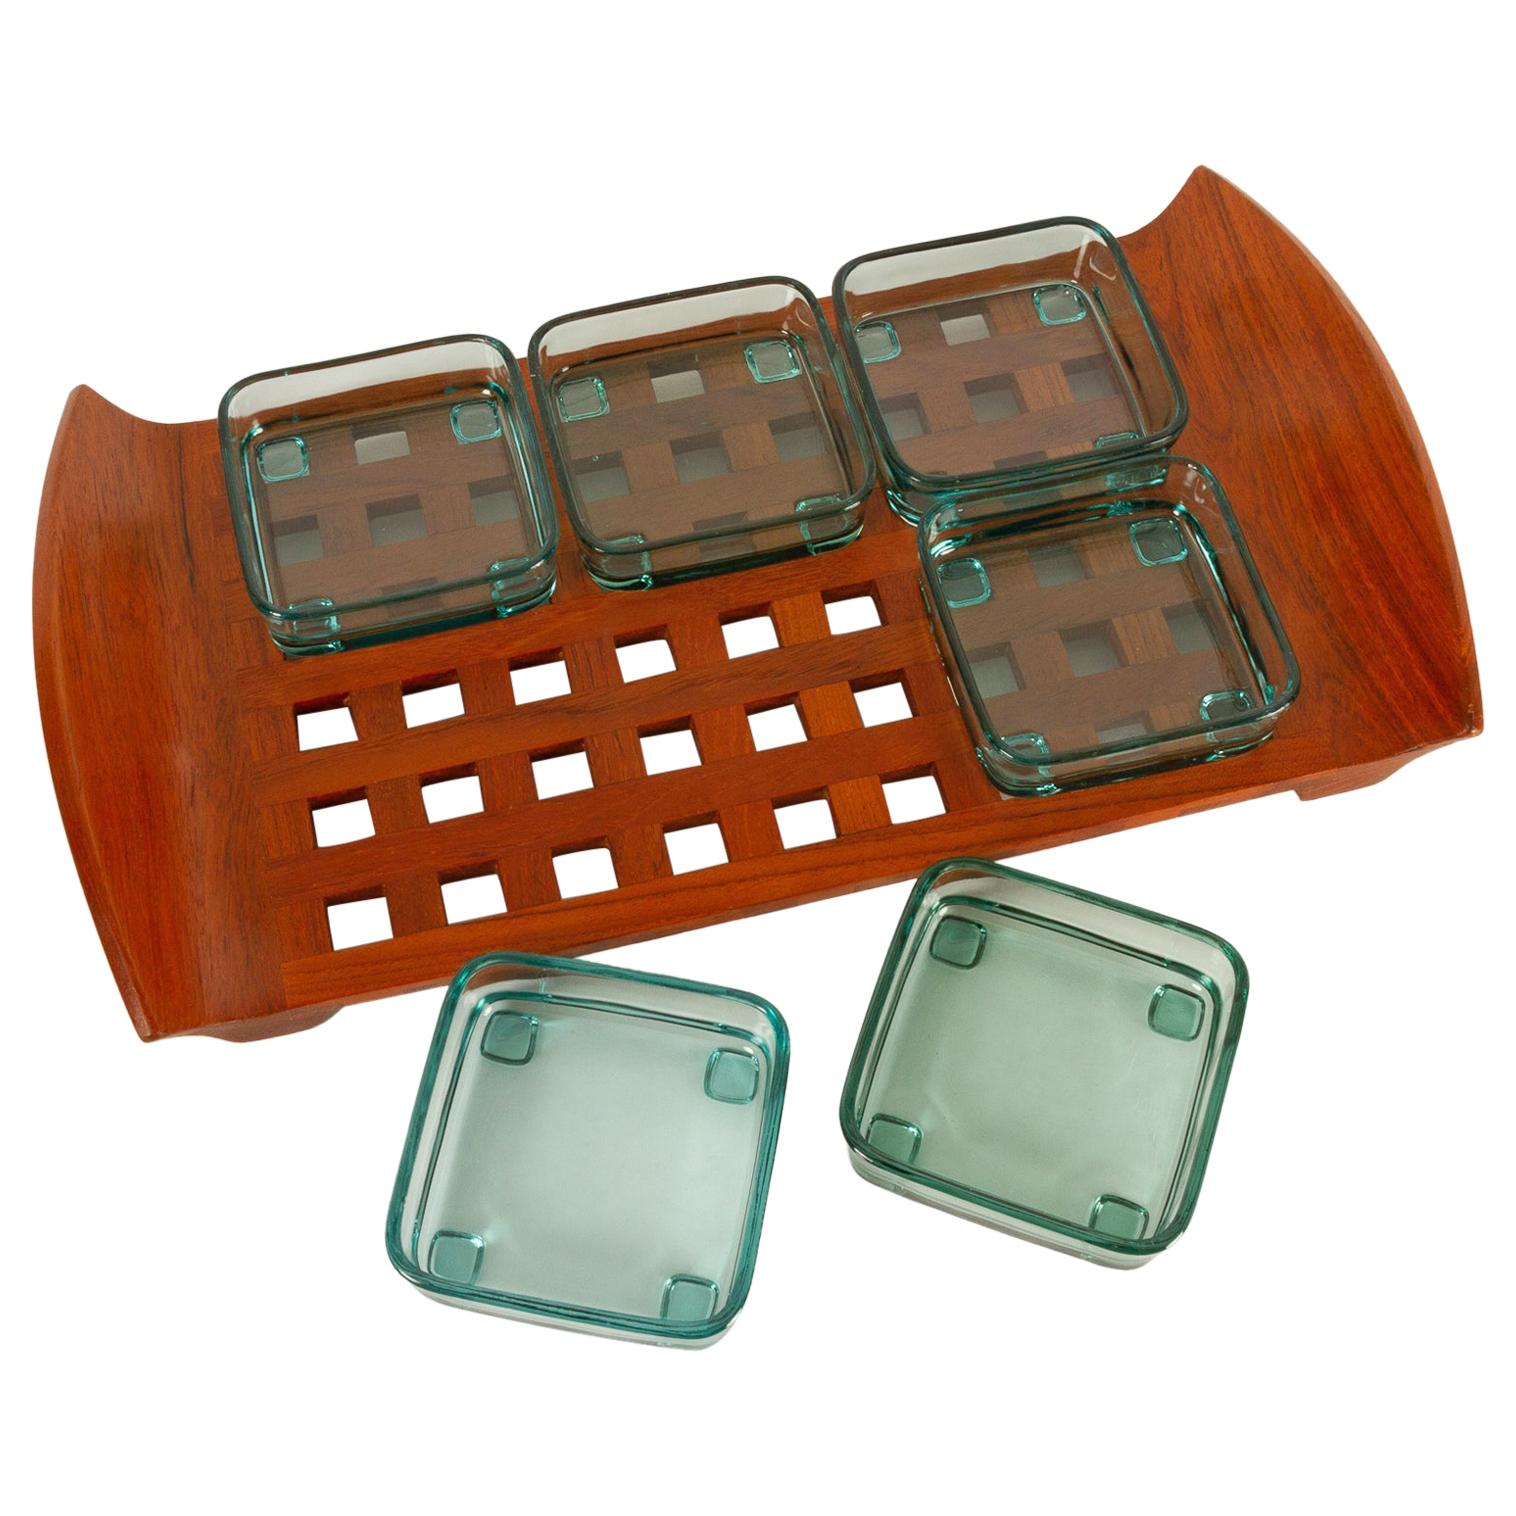 Vintage Danish Teak Tray with Glass Bowls by Jens Harald Quistgaard, 1960s